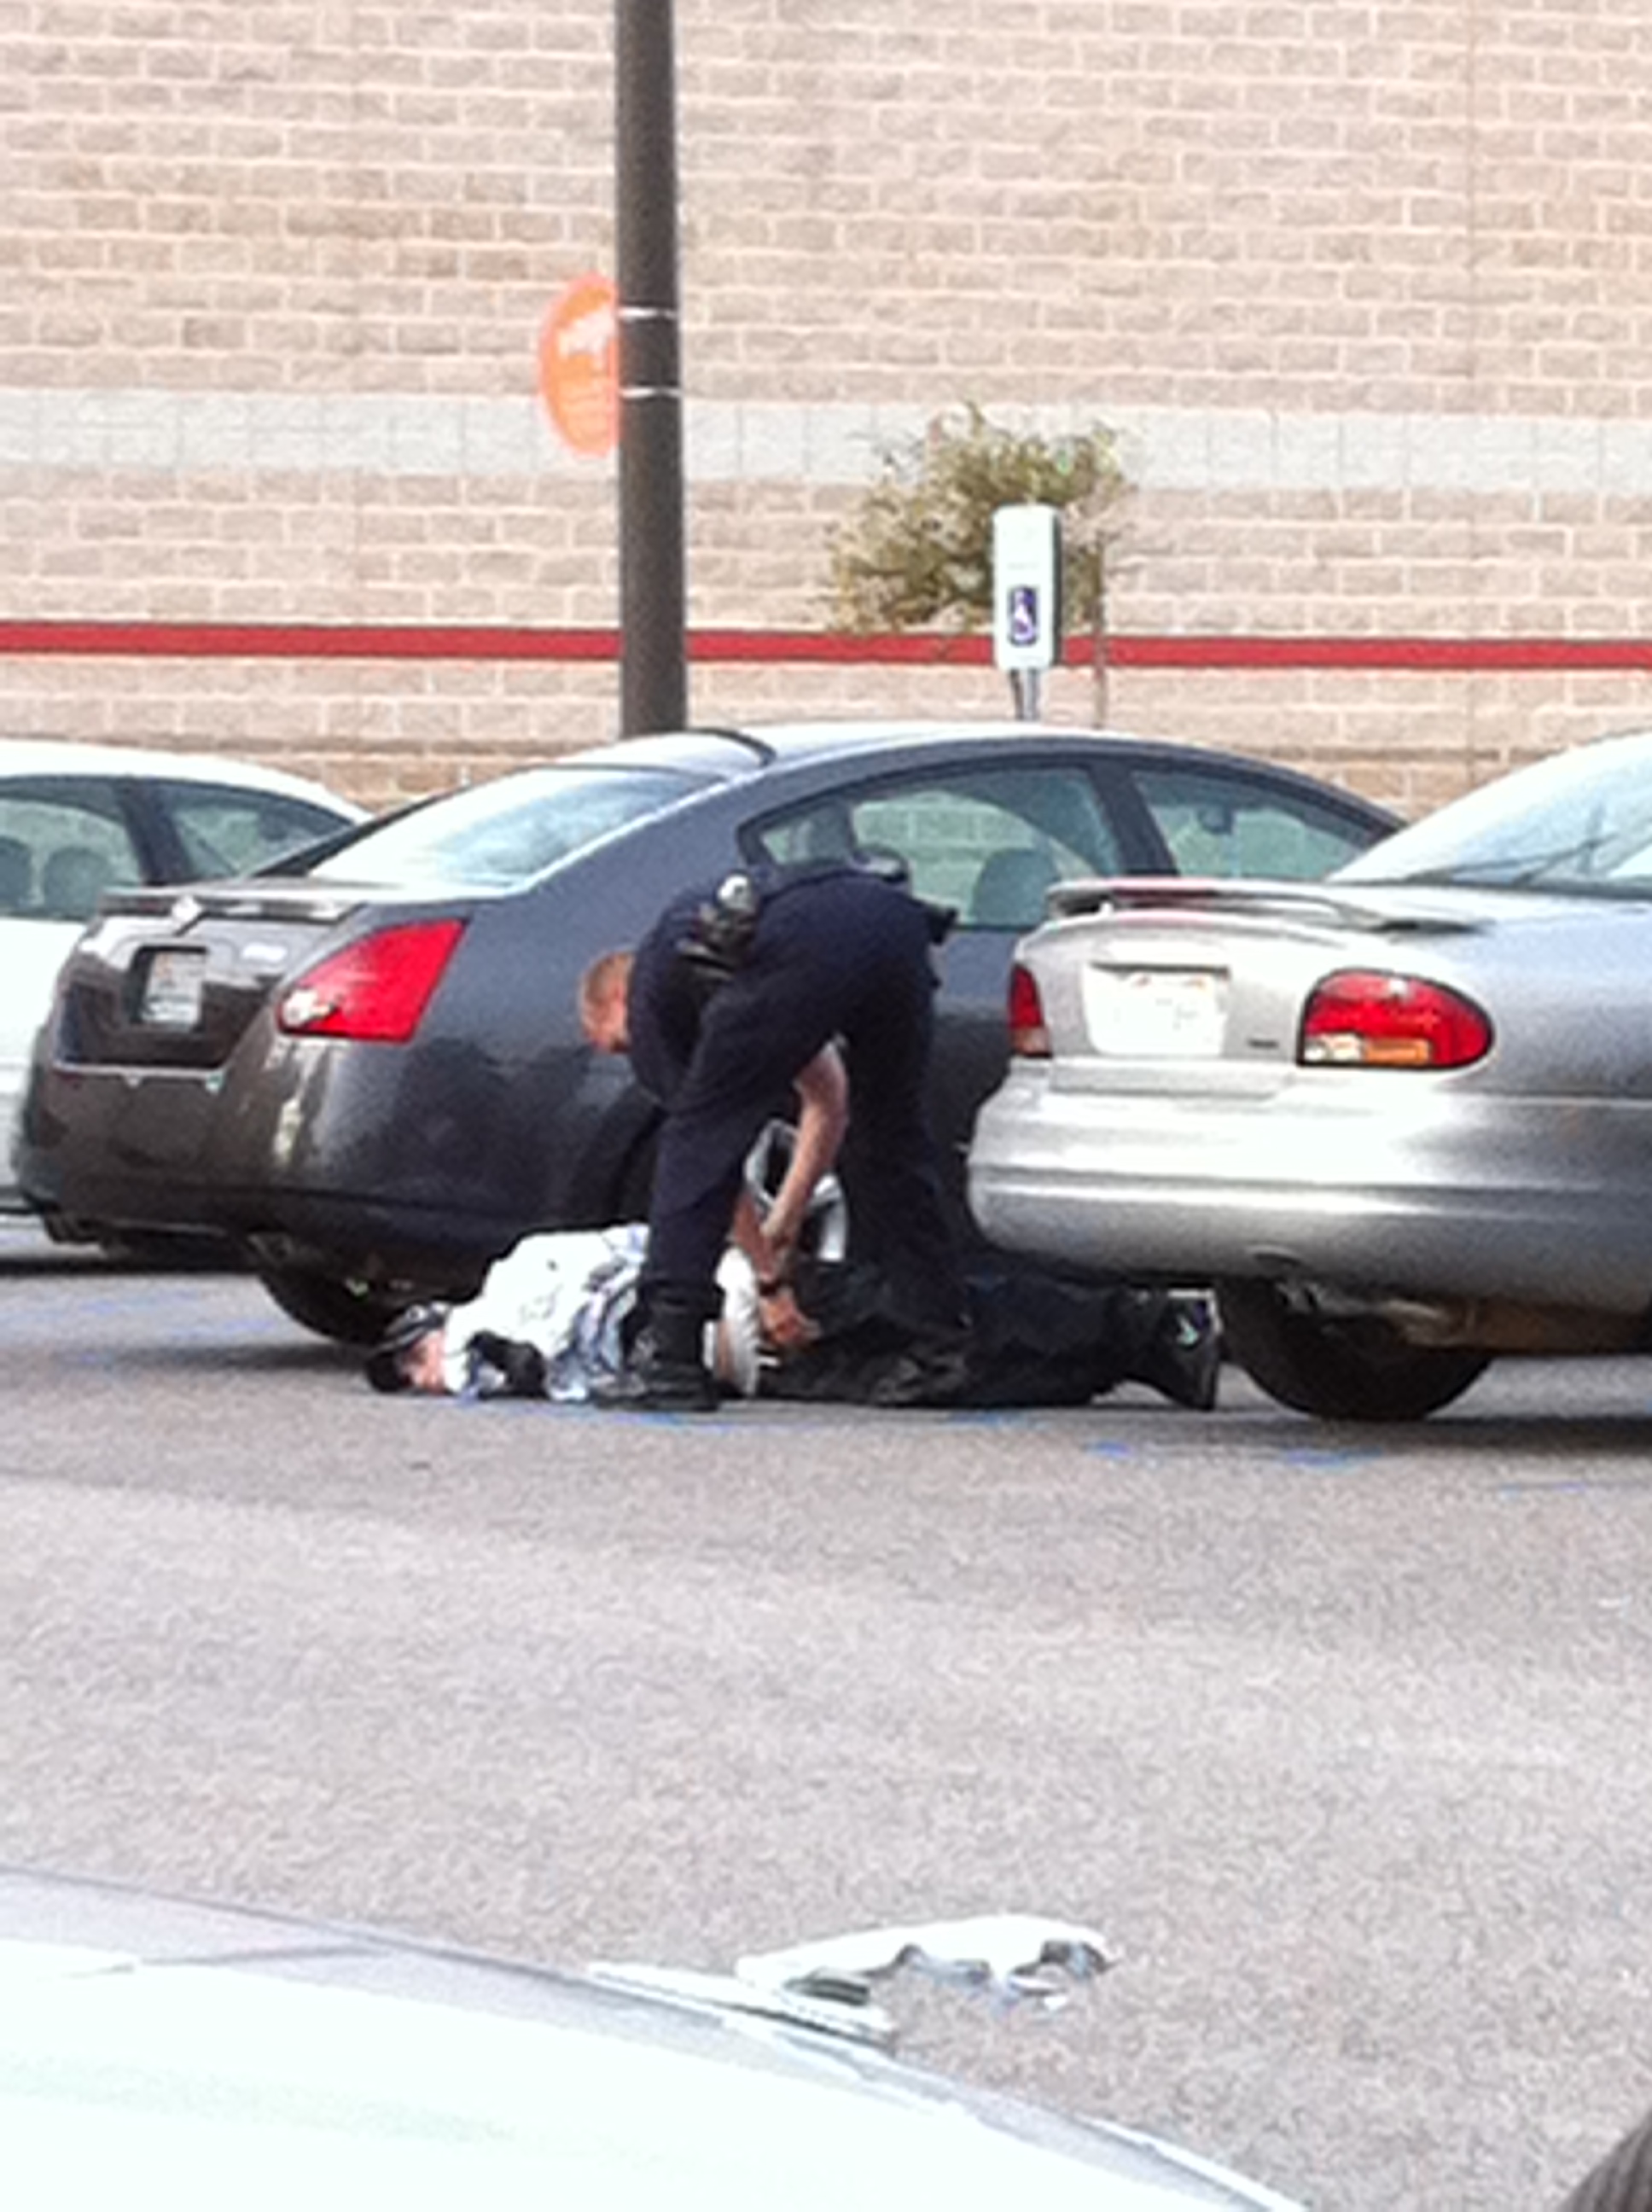 Target shoplifter arrested after returning to the scene of the crime